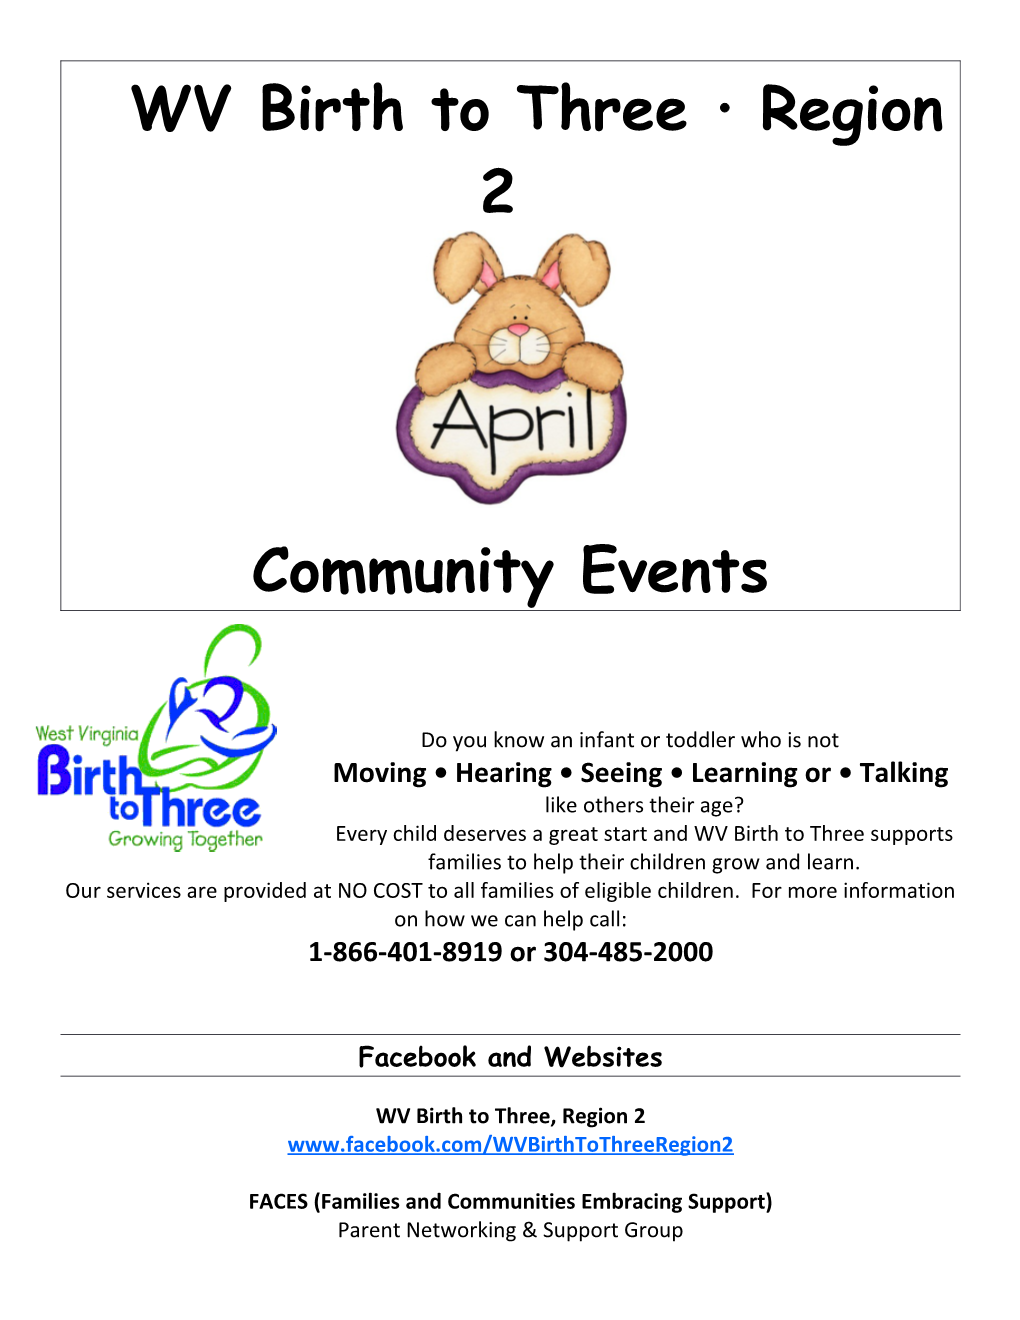 Moving Hearing Seeing Learning Or Talking